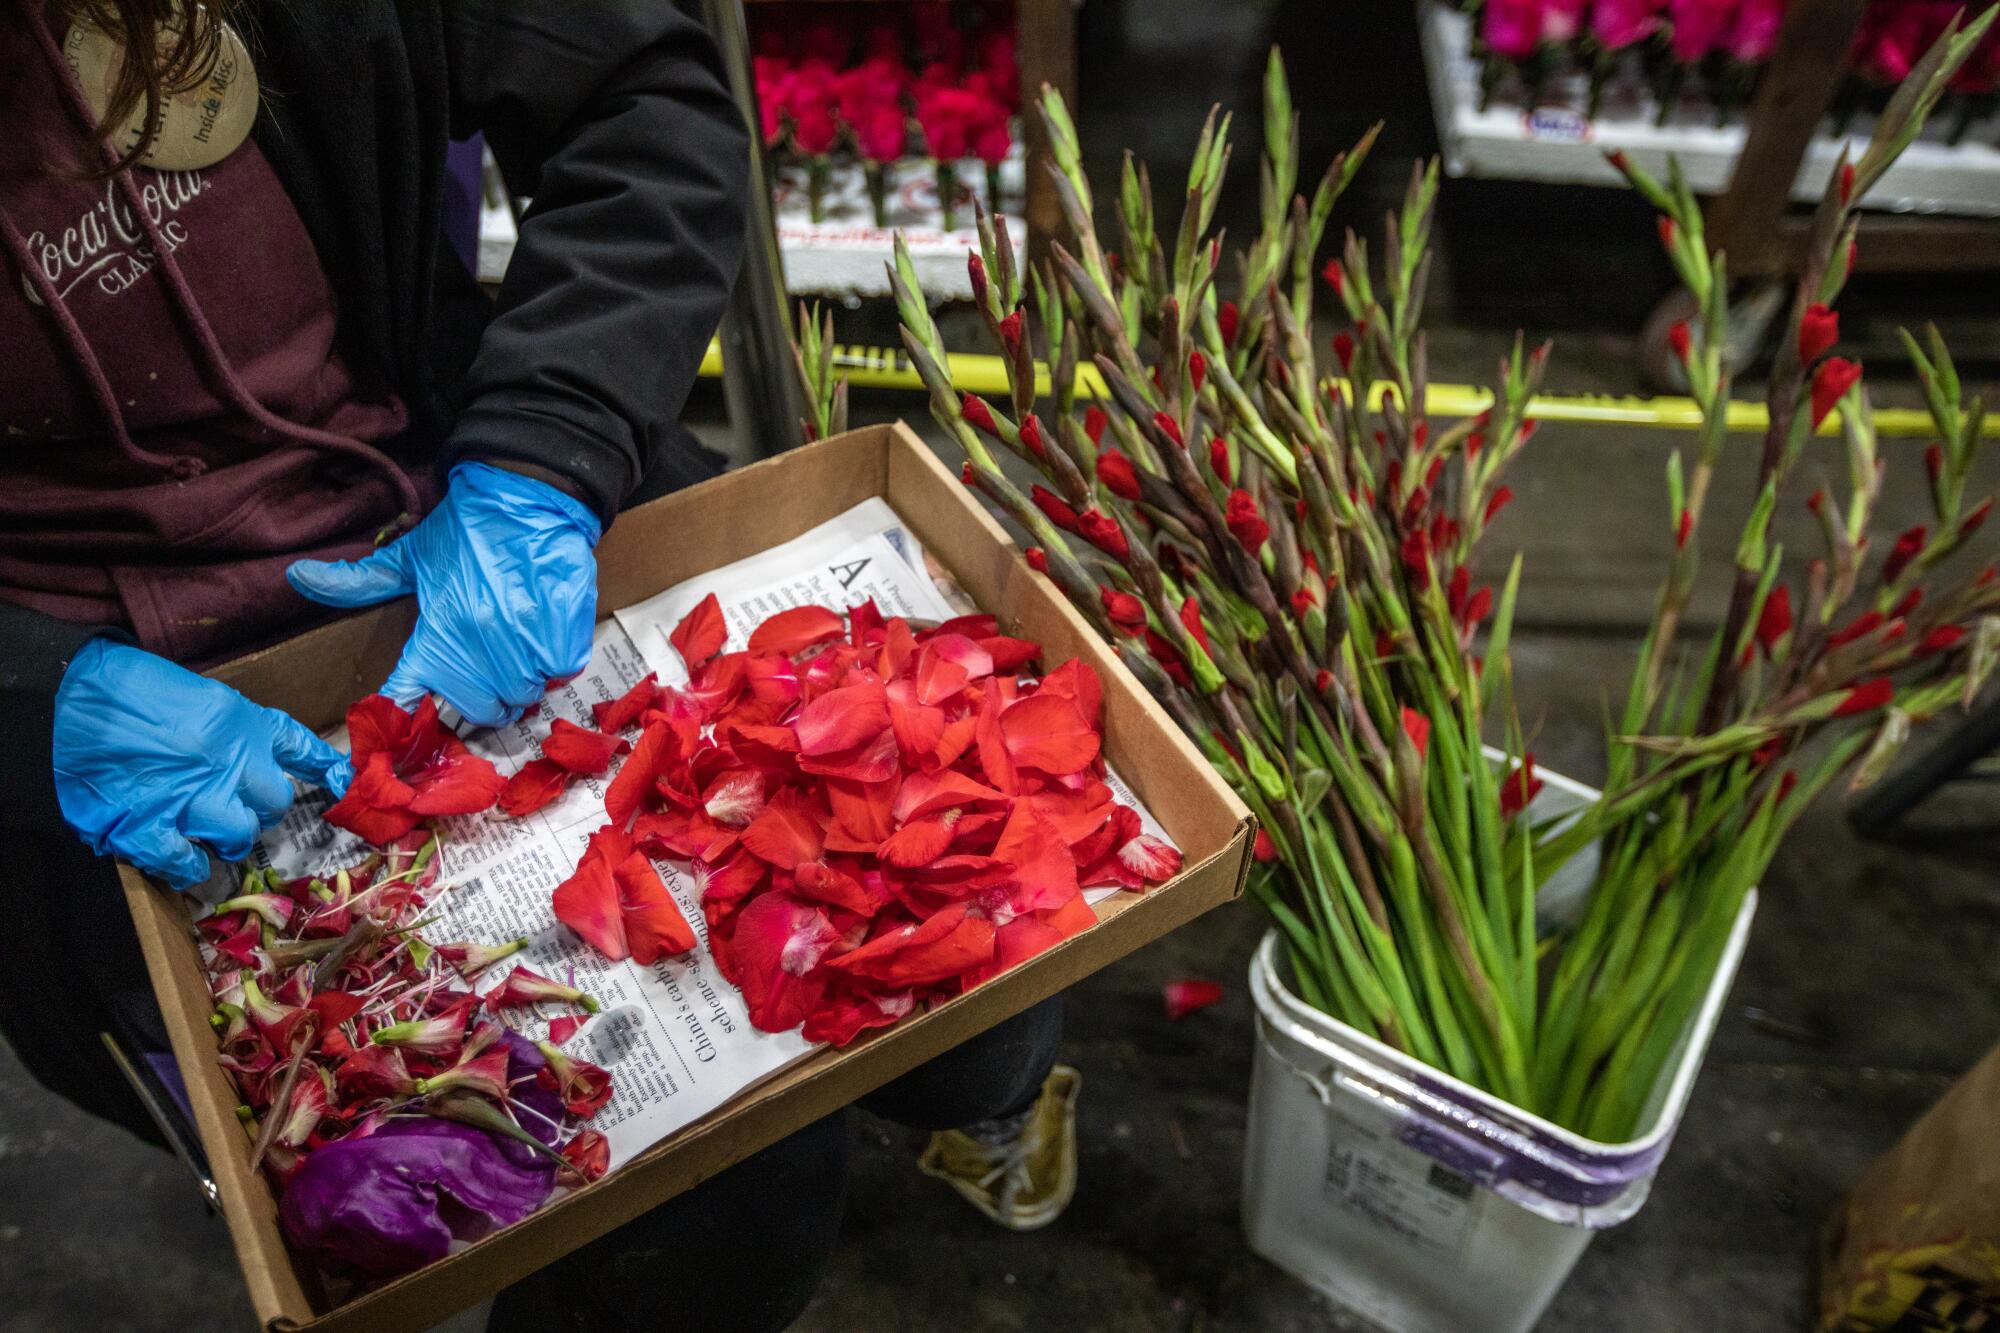 A worker tends to petals in a box